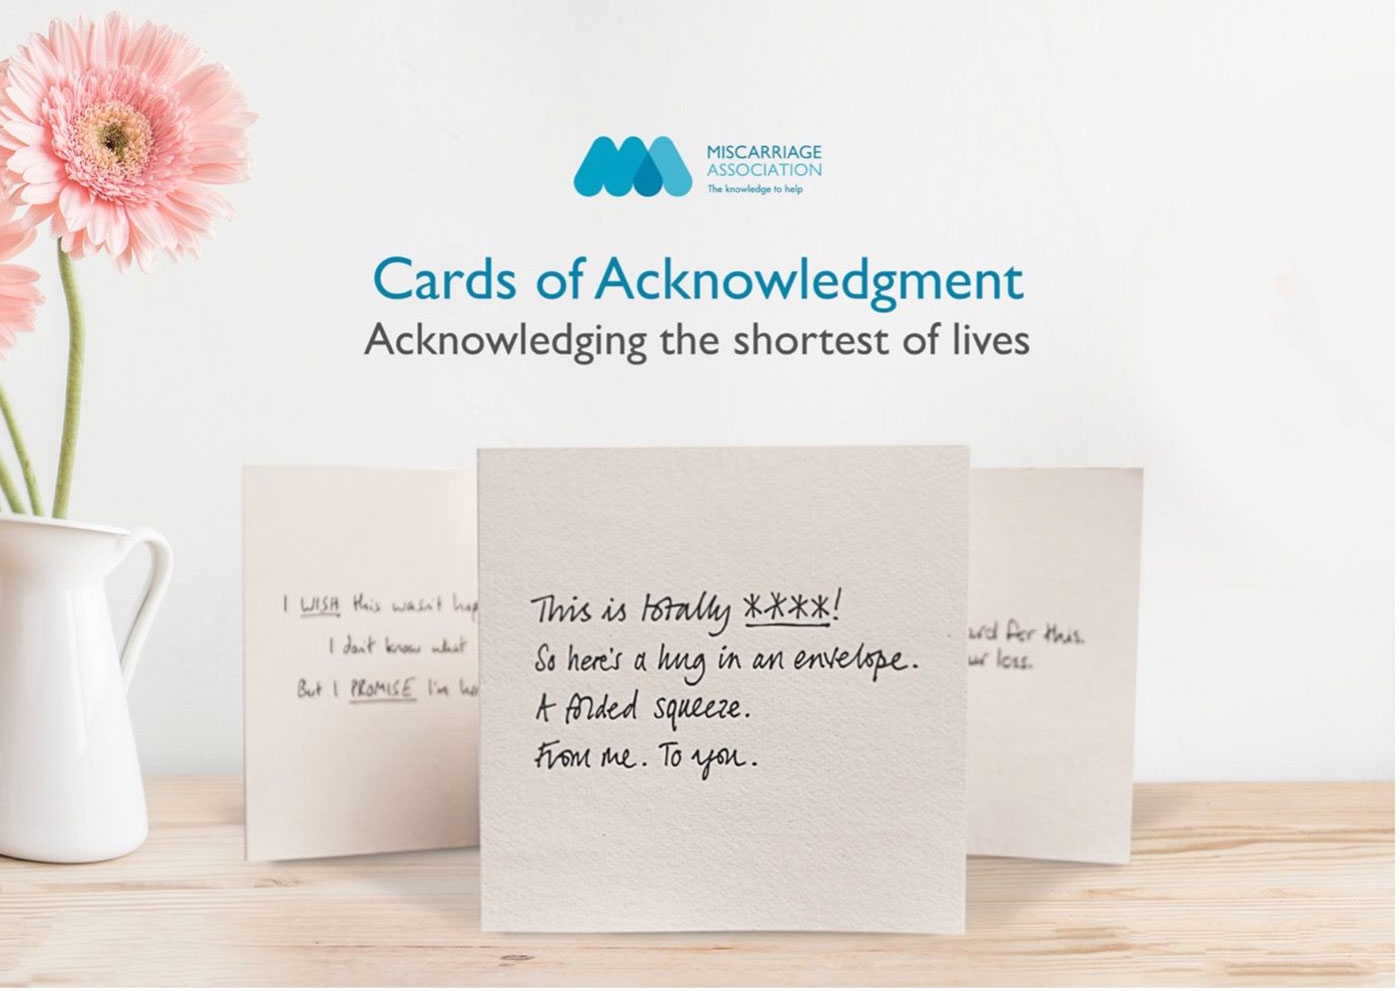 Miscarriage Association, cards of acknowledgement